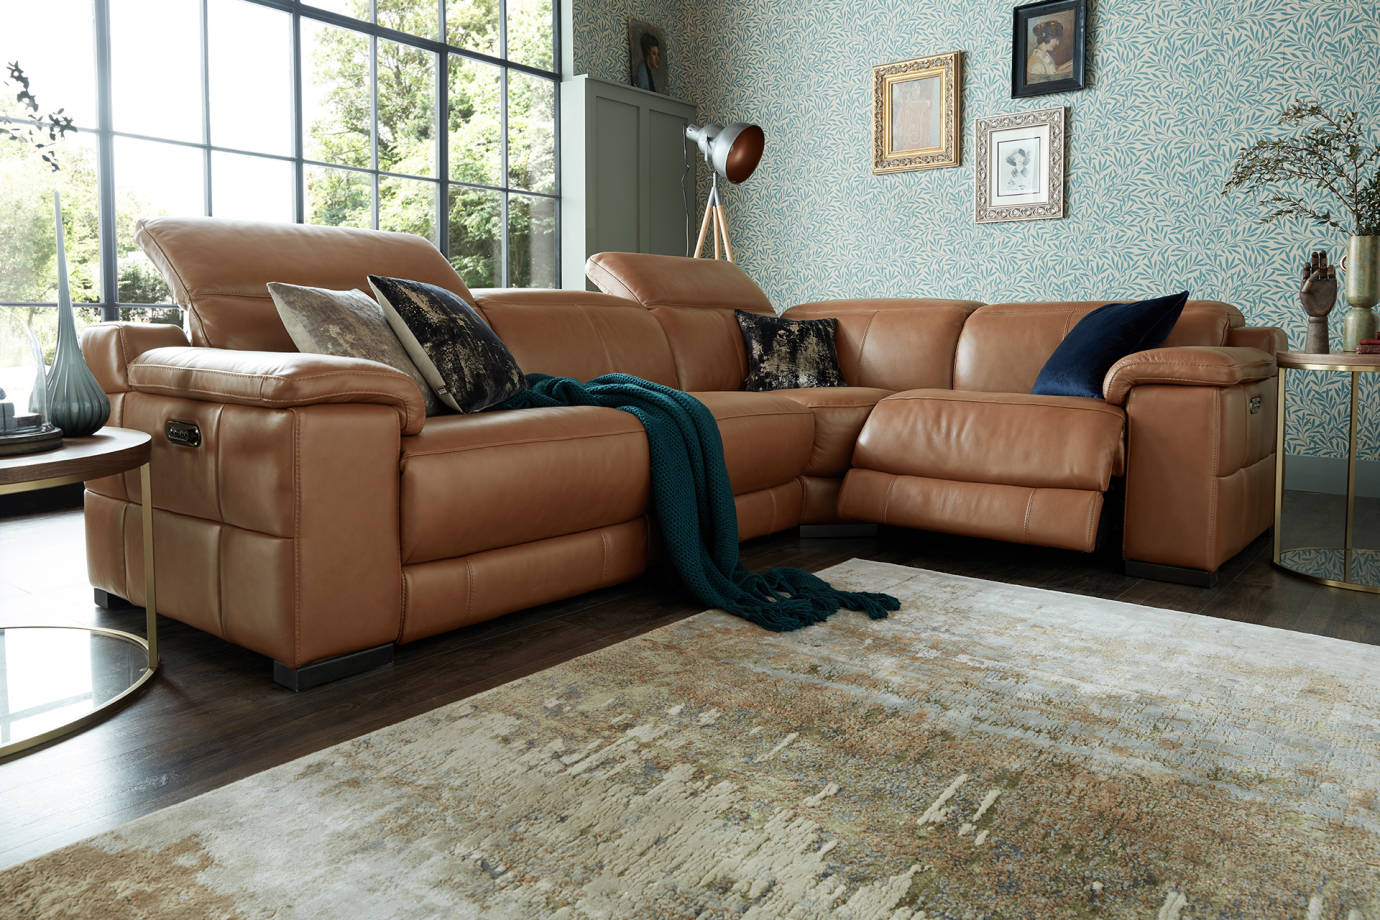 Recliner Sofas Leather Fabric And, Brown Leather Couch Recliner Set